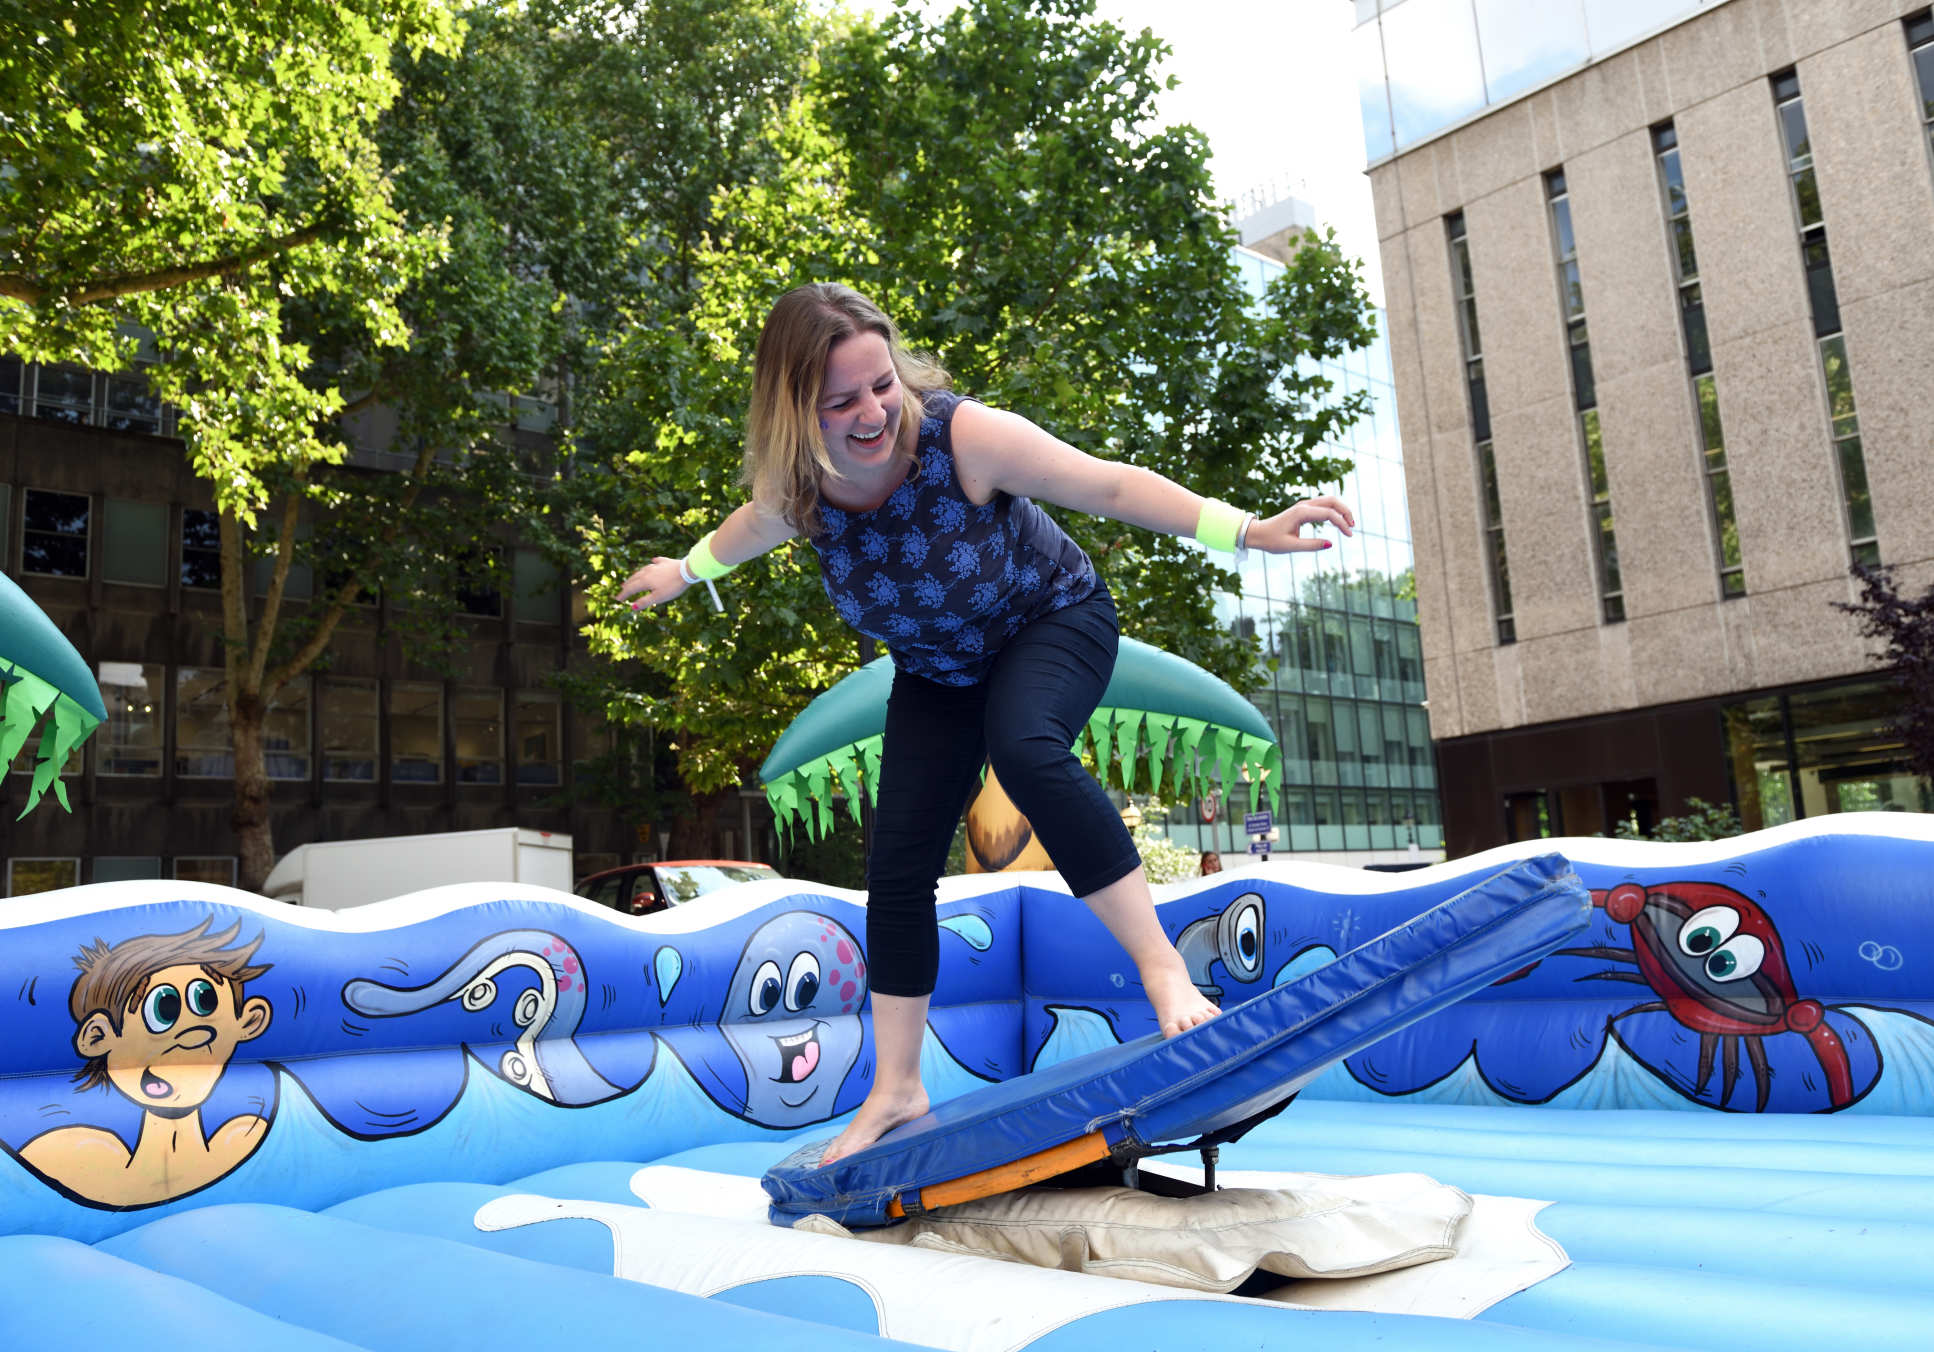 A staff member tries out surfing on an inflatable surfboard